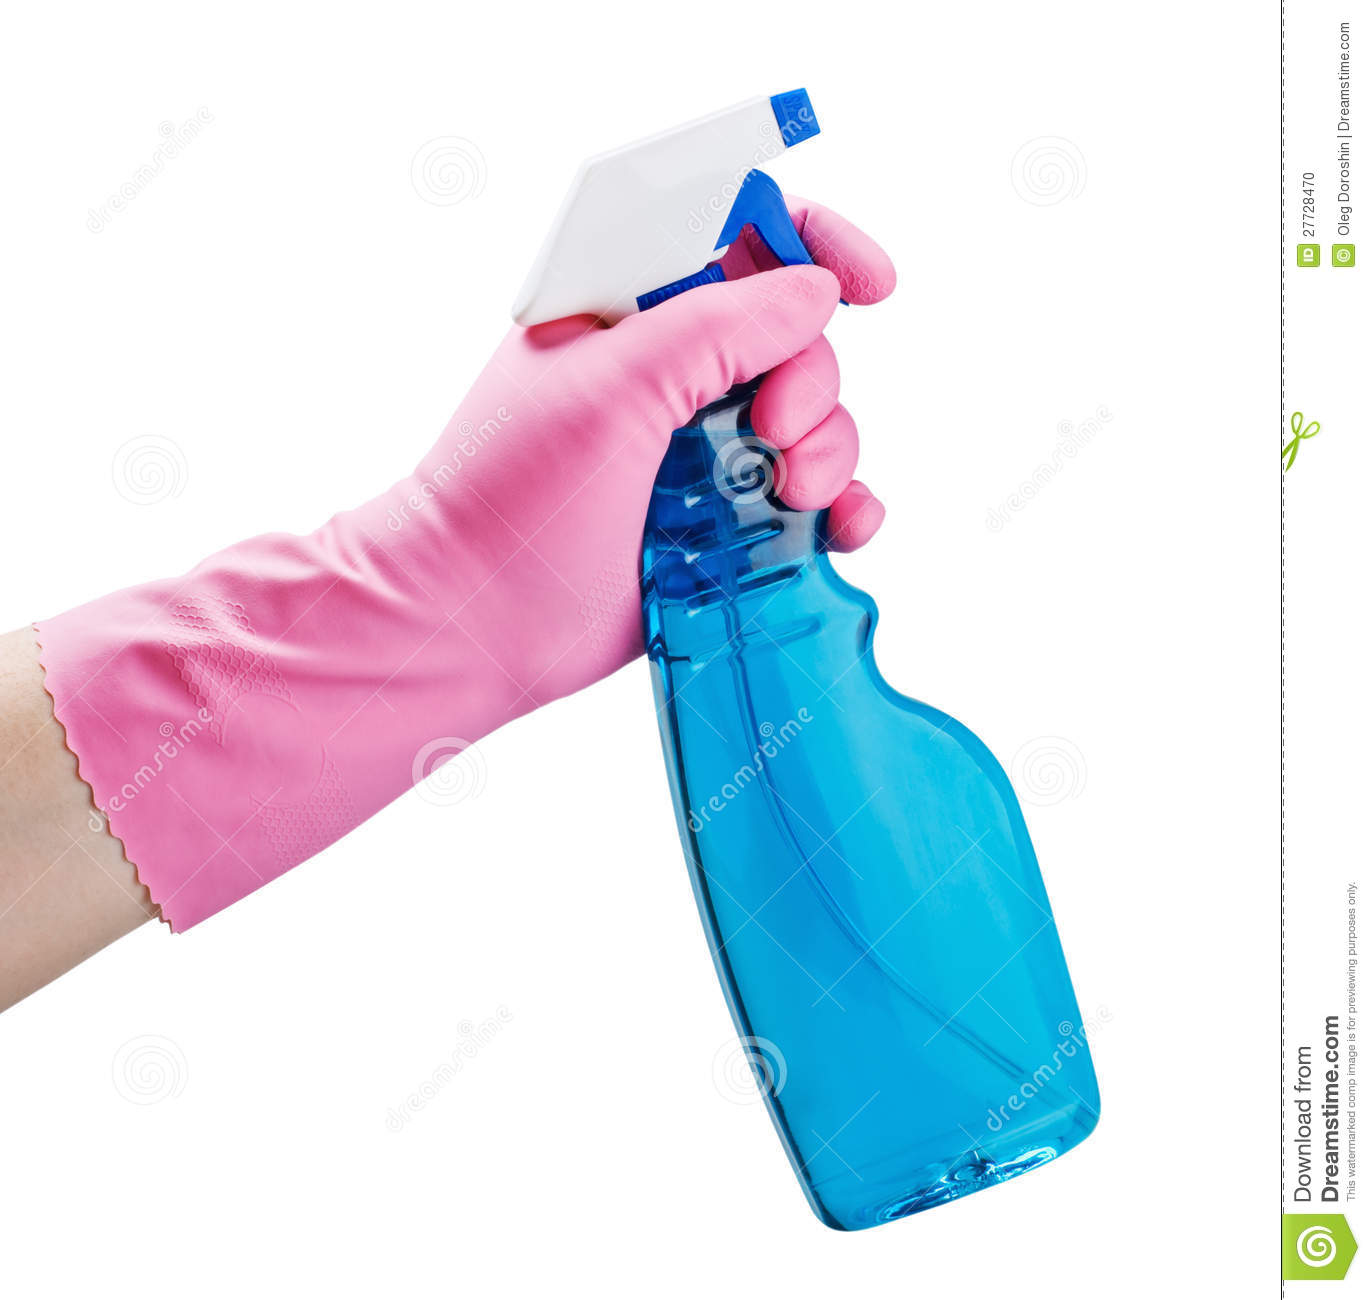 More Similar Stock Images Of   Gloved Hand Holding A Spray Bottle